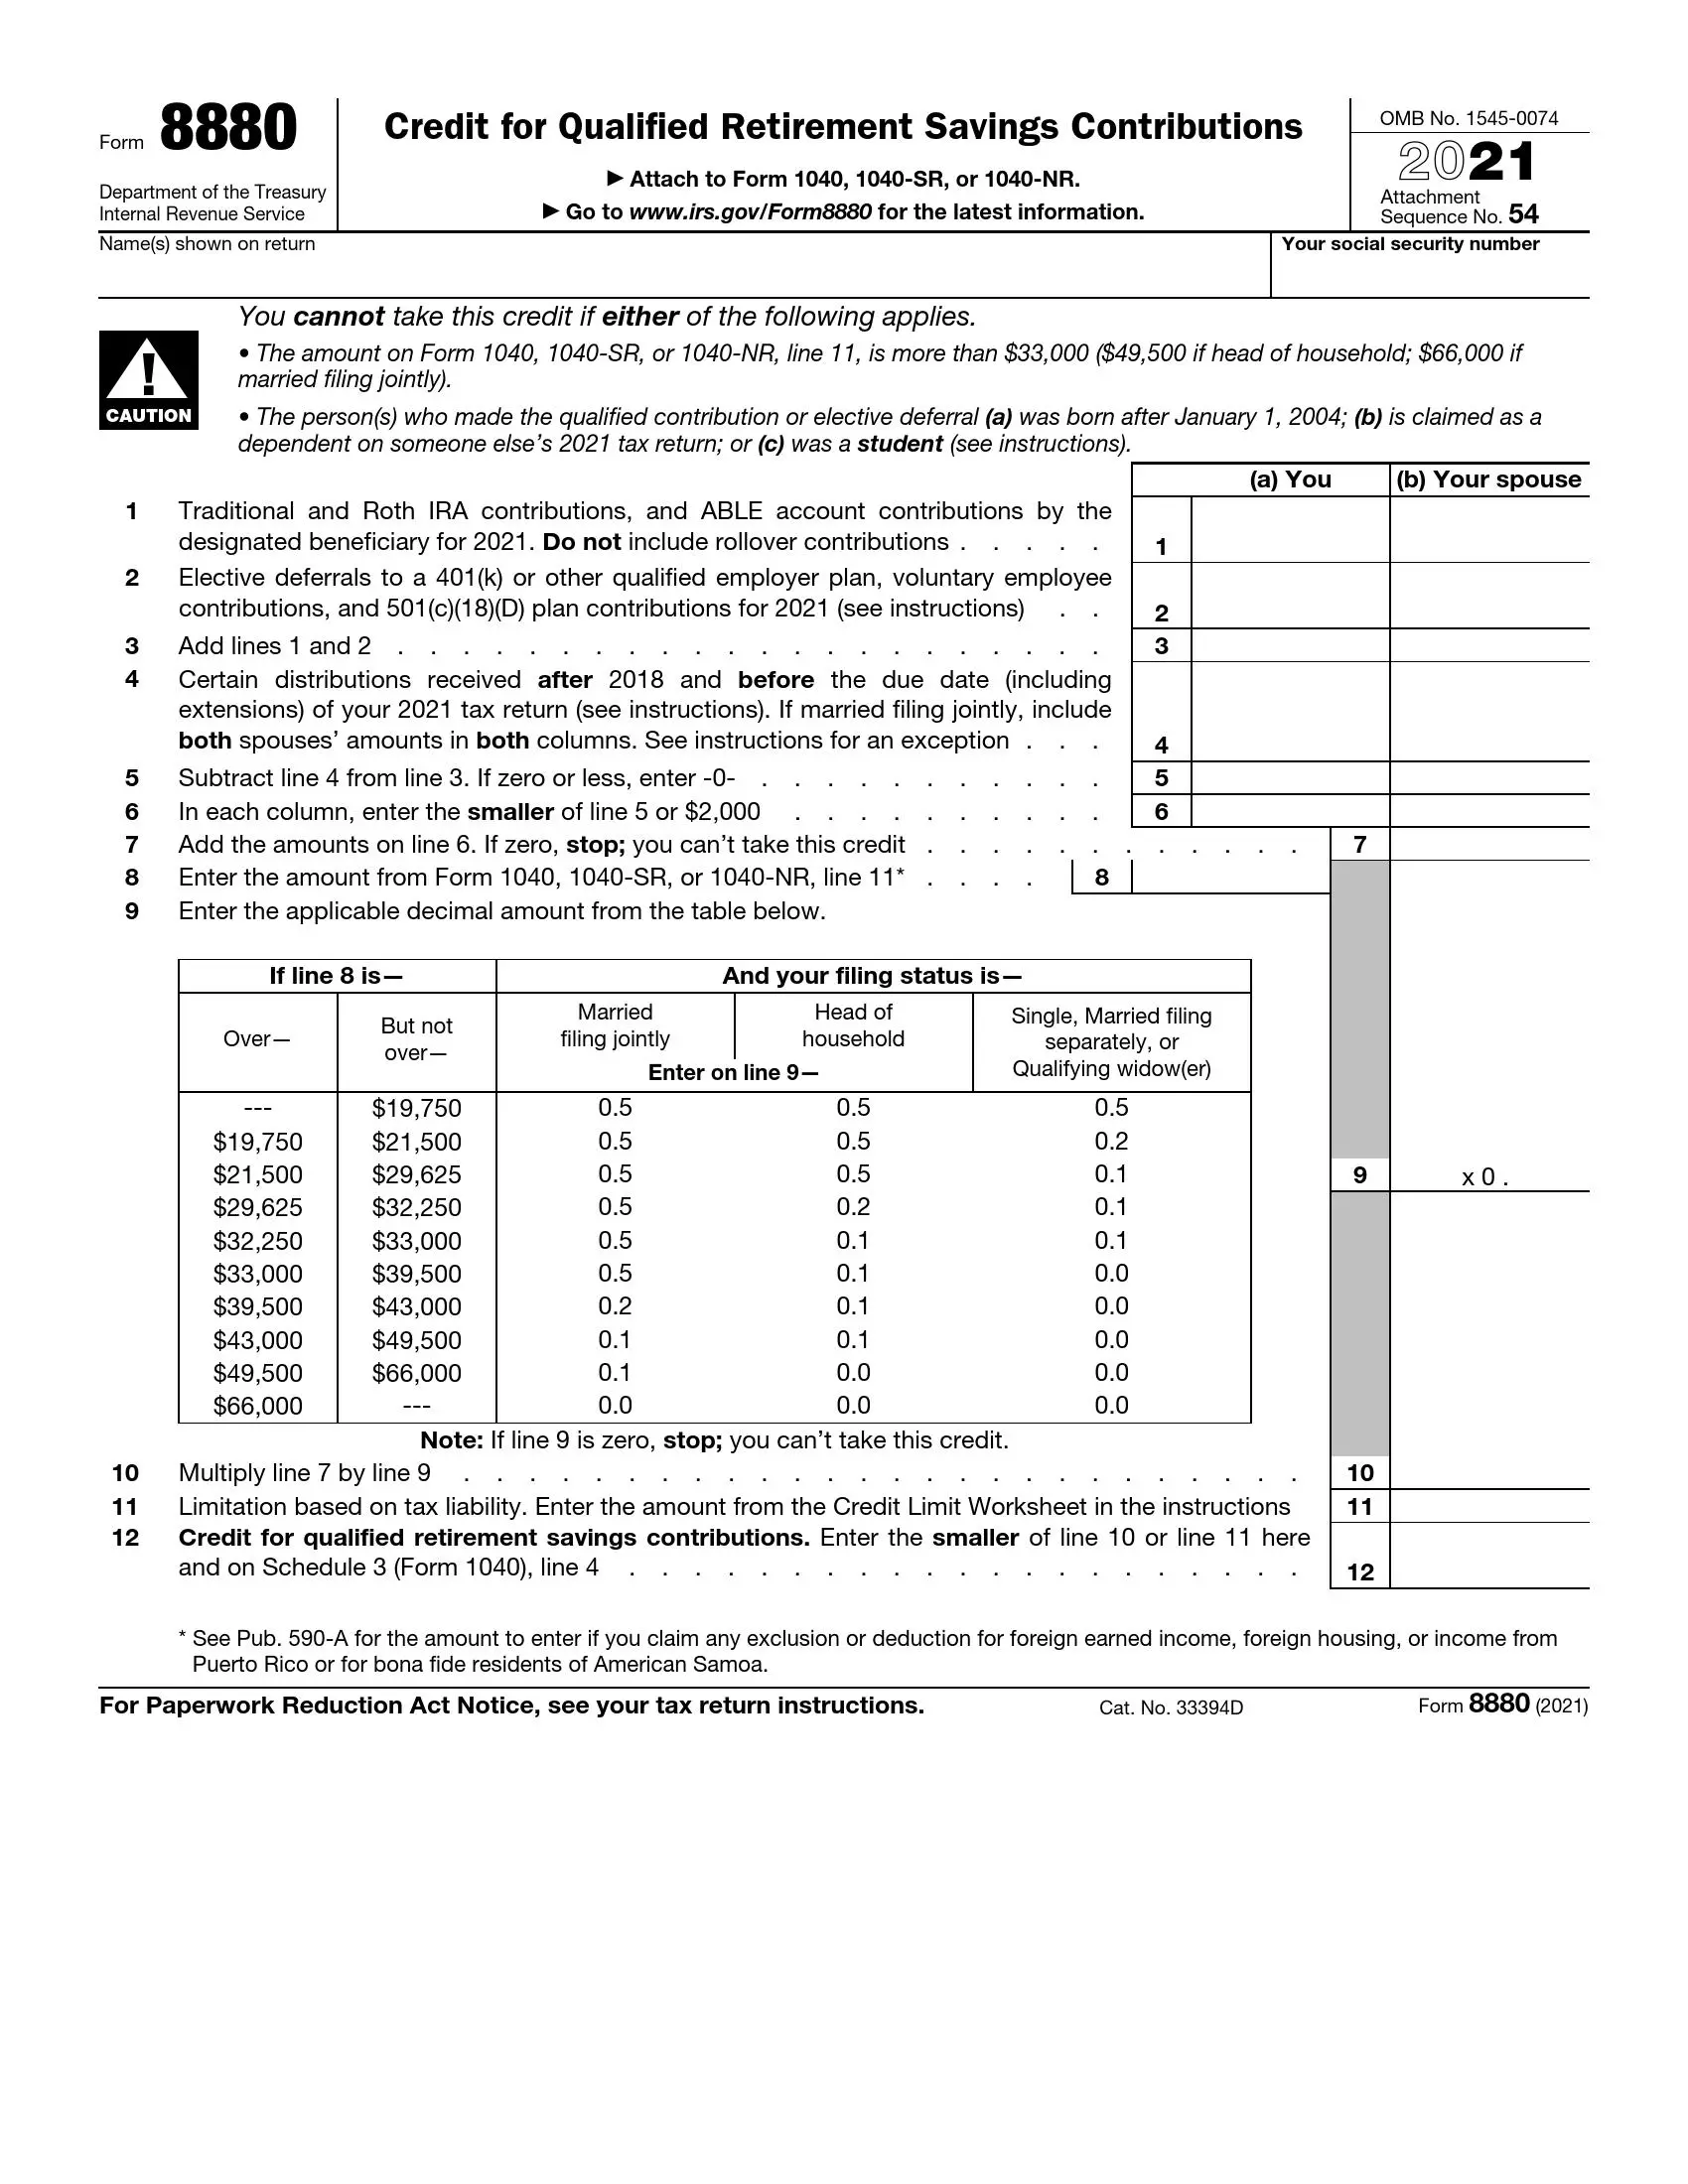 irs form 8880 2021 preview